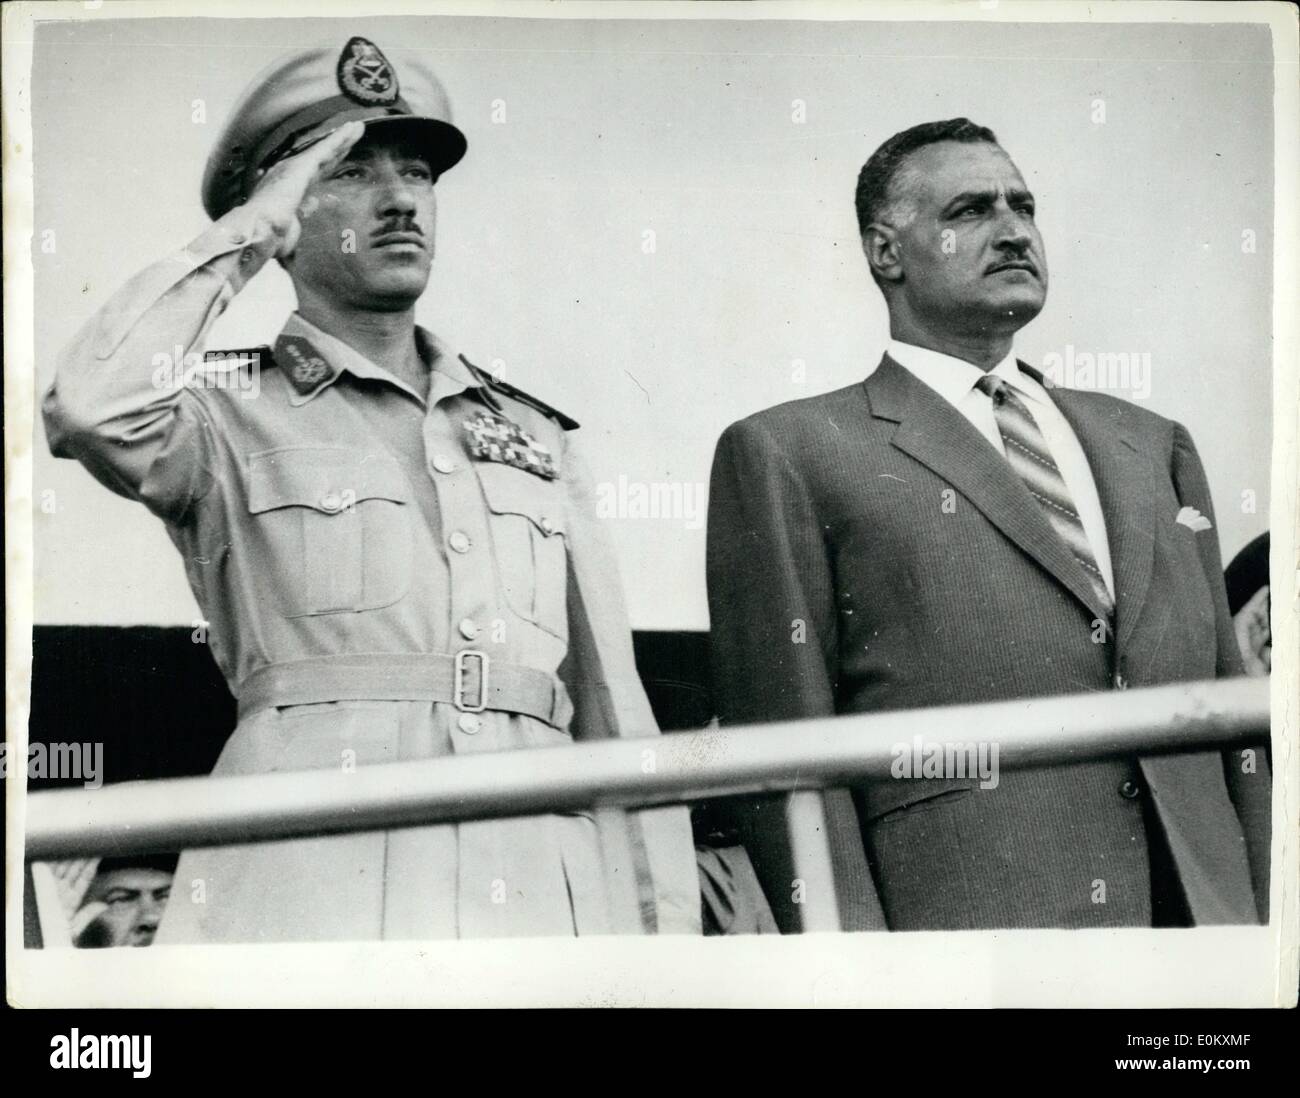 Jul. 07, 1952 - Nasser Shows off his Rockets in Cairo. Takes salute at Anniversary March Past: Egyptian rocket were the centre piece of the recent Military Parade through the streets of Cairo held to celebrate the 10th. Anniversary of the Revolution. The rockets - 'Conqueror' with a range of 400 miles and the Victor (range of 250 miles) - are, according to President Nasser - now under mass production in Egypt. Observers were quick to note that the rockets brought Israel within range of Egypt. Photo shows President Nasser accompanied by Field Marshal Abdul Hakim Amir C.I.C of the U.A Stock Photo